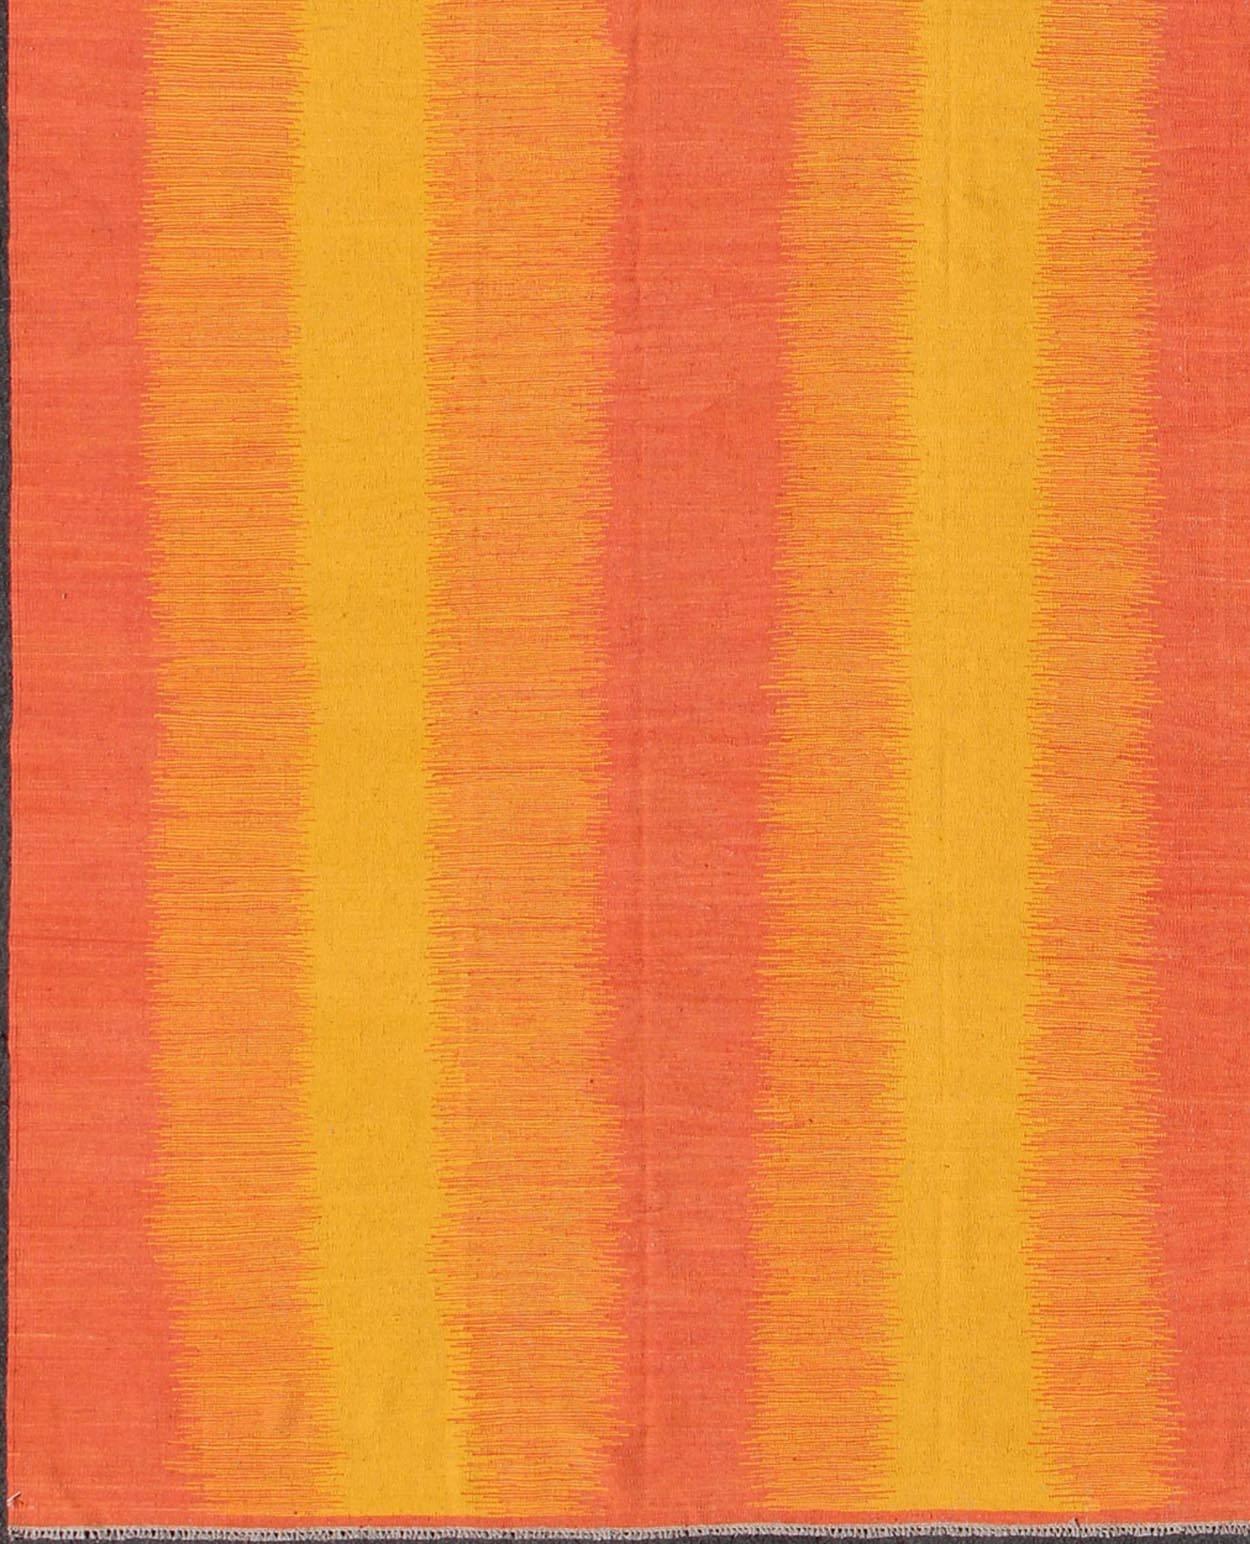 This gorgeously woven designer Kilim is decorated with a vertical stripe pattern. The flat-woven rug is rendered in shades of yellow, orange and pink; the composition is exceptionally reminiscent of a beautiful sunset.

Measures: 10'5'' x